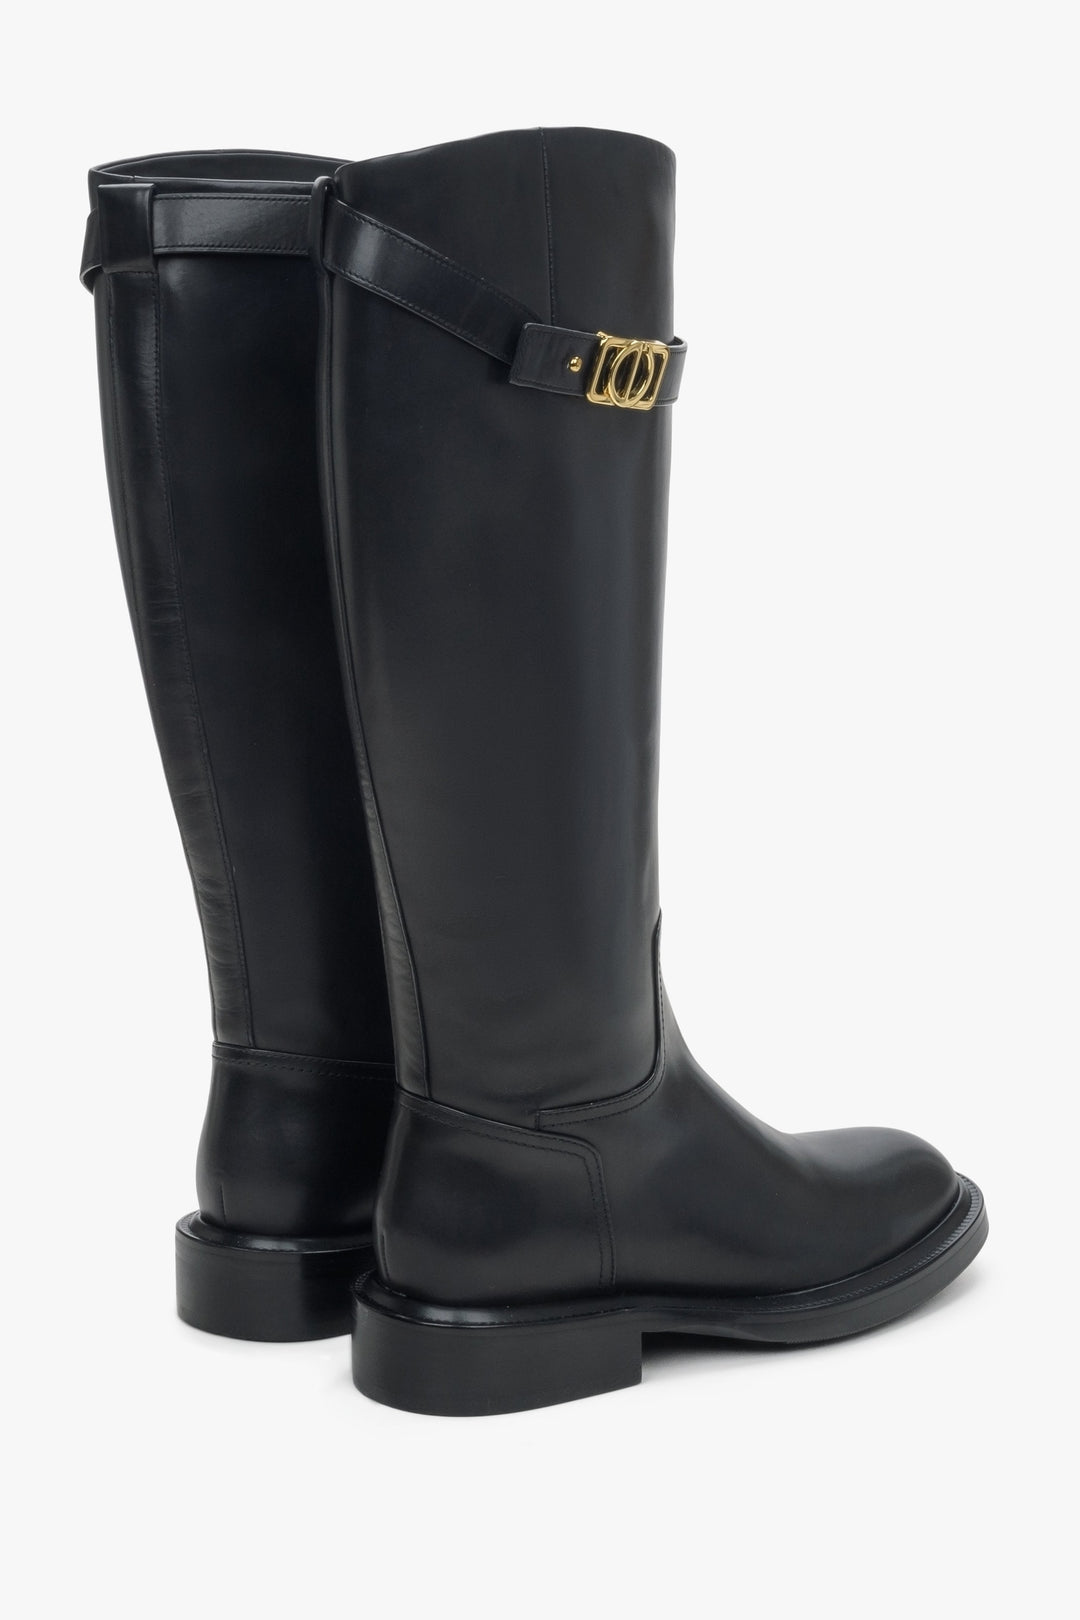 Women's black leather boots by Estro with a decorative strap - close-up on the back and side of the shoe.